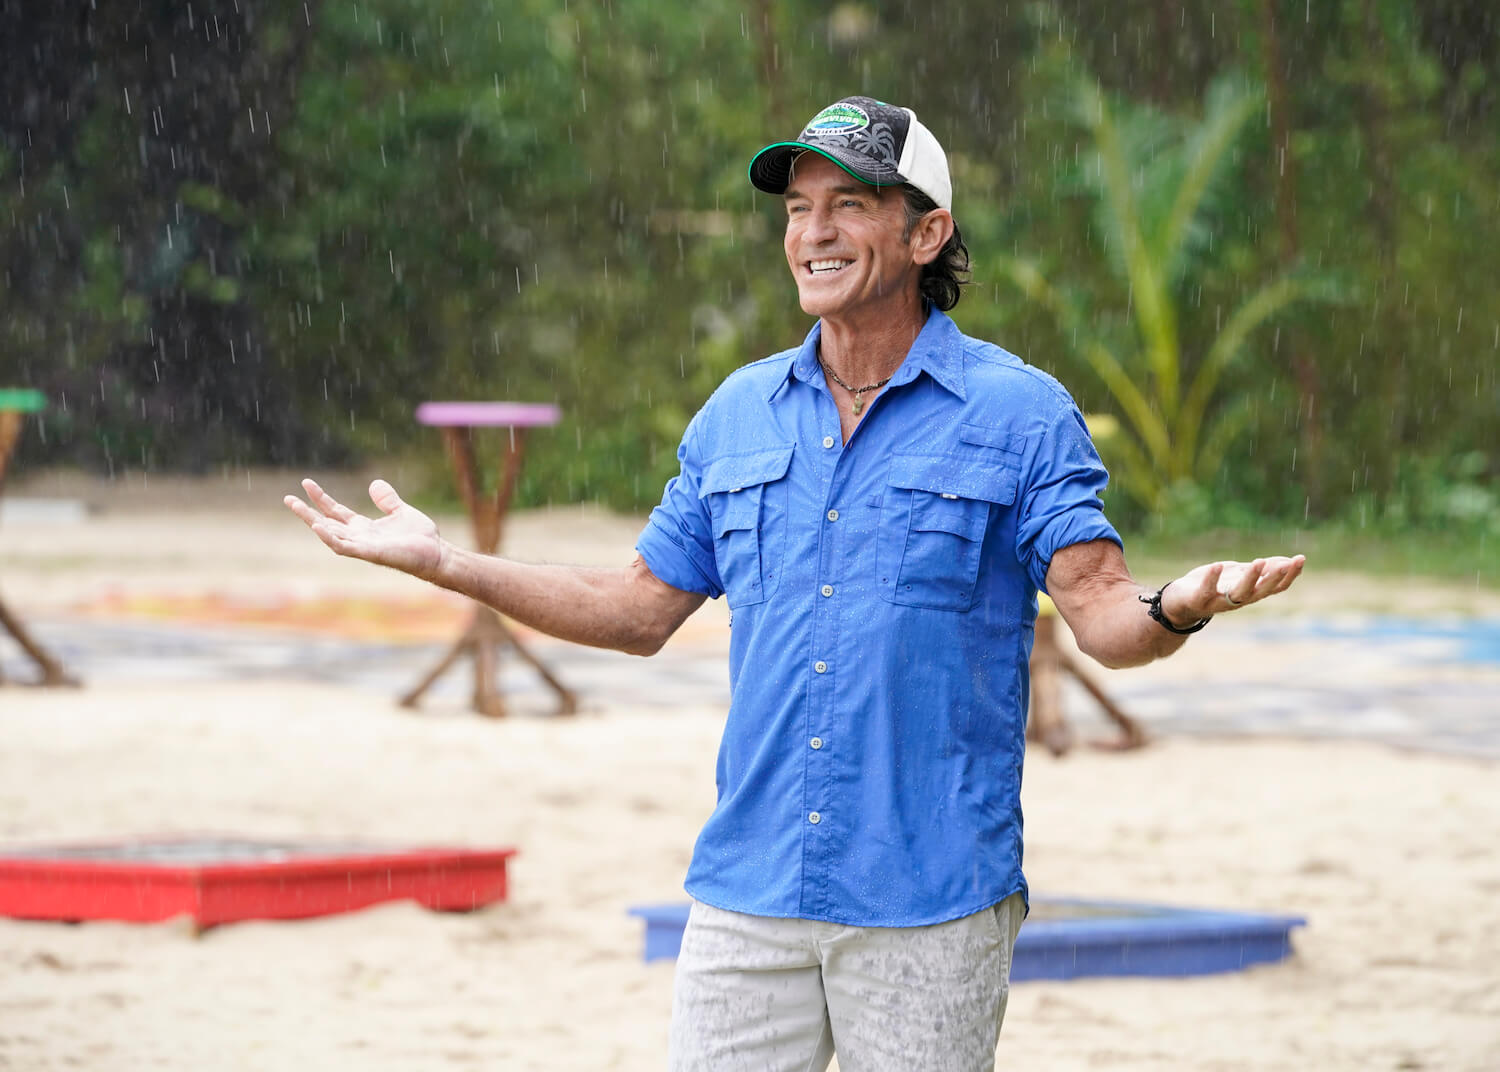 Jeff Probst from 'Survivor' Season 45 standing in the rain and smiling